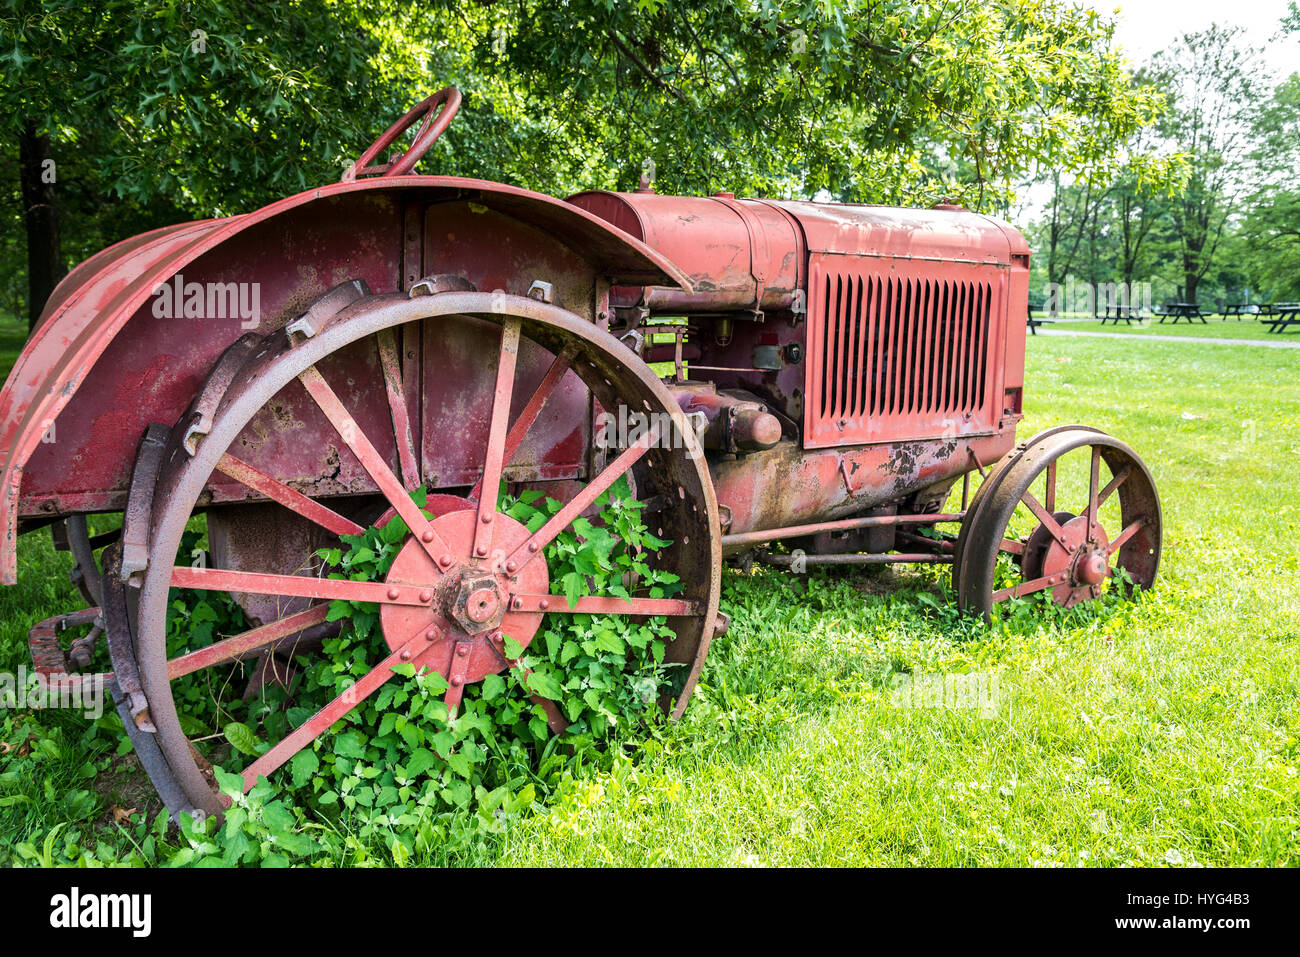 An old rusty red tractor with metal wheels sits in a field of green pasture in Ontario Canada. Stock Photo